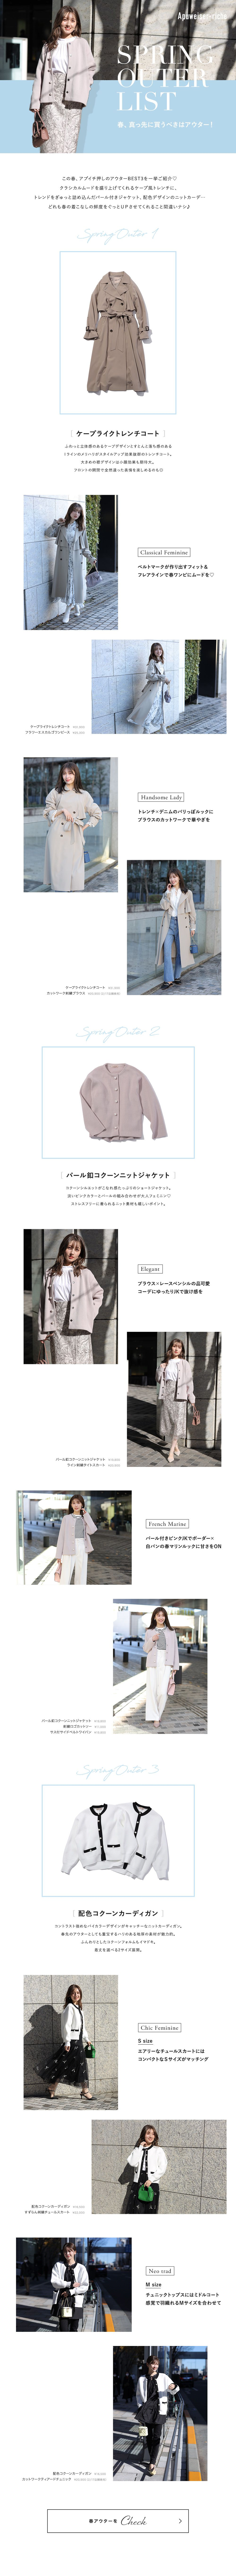 SPRING OUTER LIST